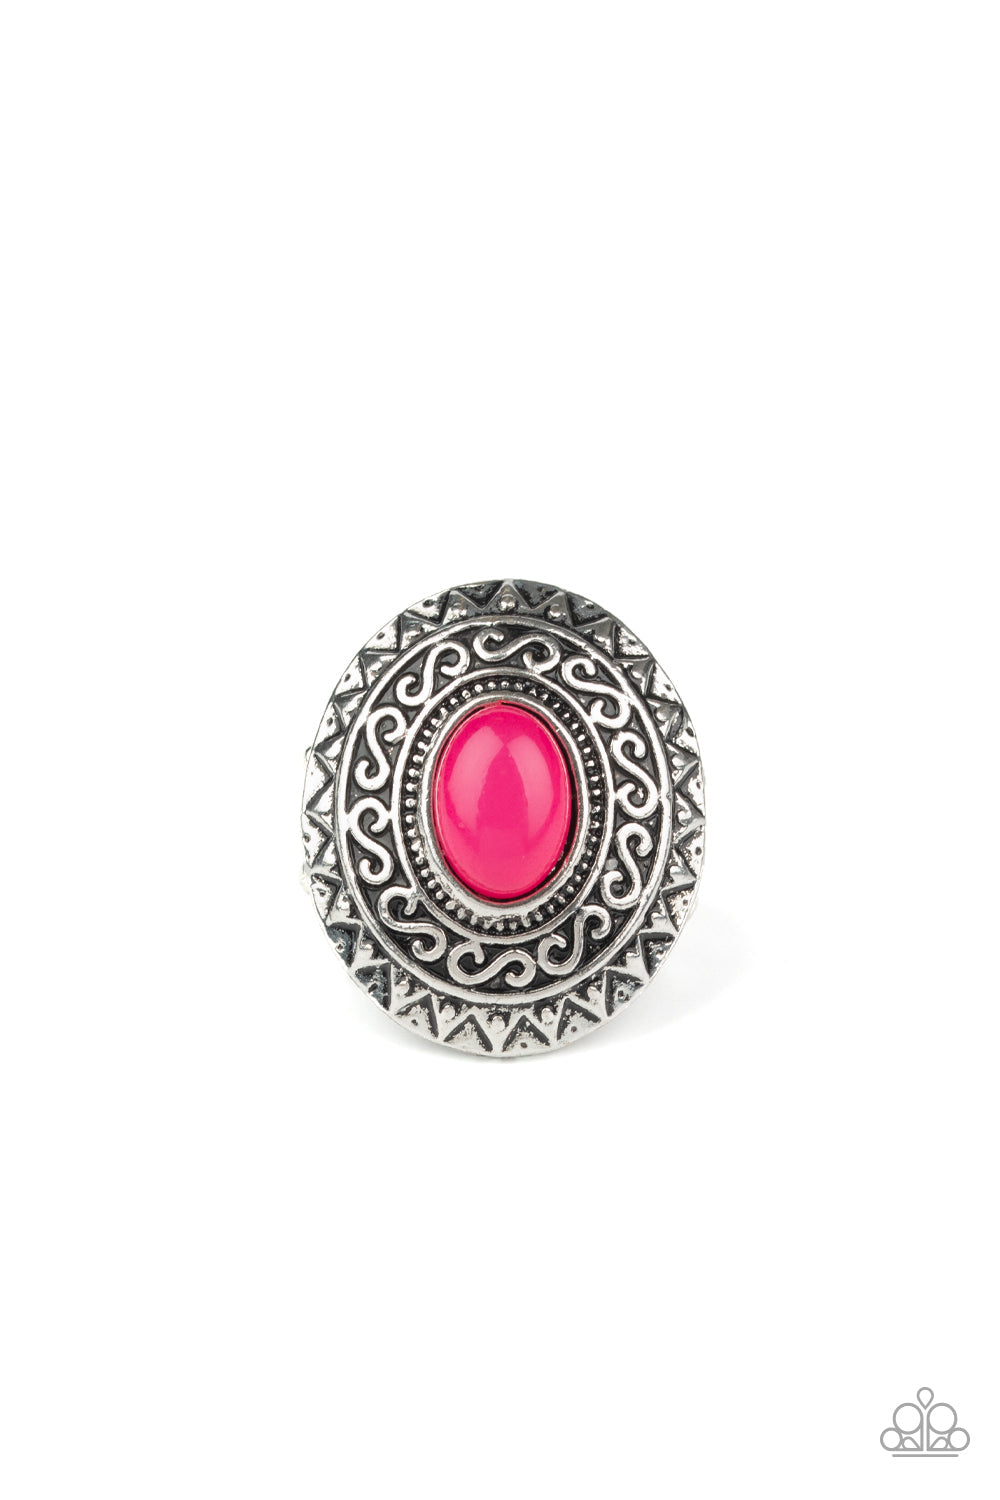 Hello, Sunshine - Pink and Silver Ring - Paparazzi Accessories - A glowing pink stone is pressed in the center of a dramatic silver frame radiating with shimmery sunburst details for a seasonal look. Features a stretchy band for a flexible fit. Sold as one individual ring.